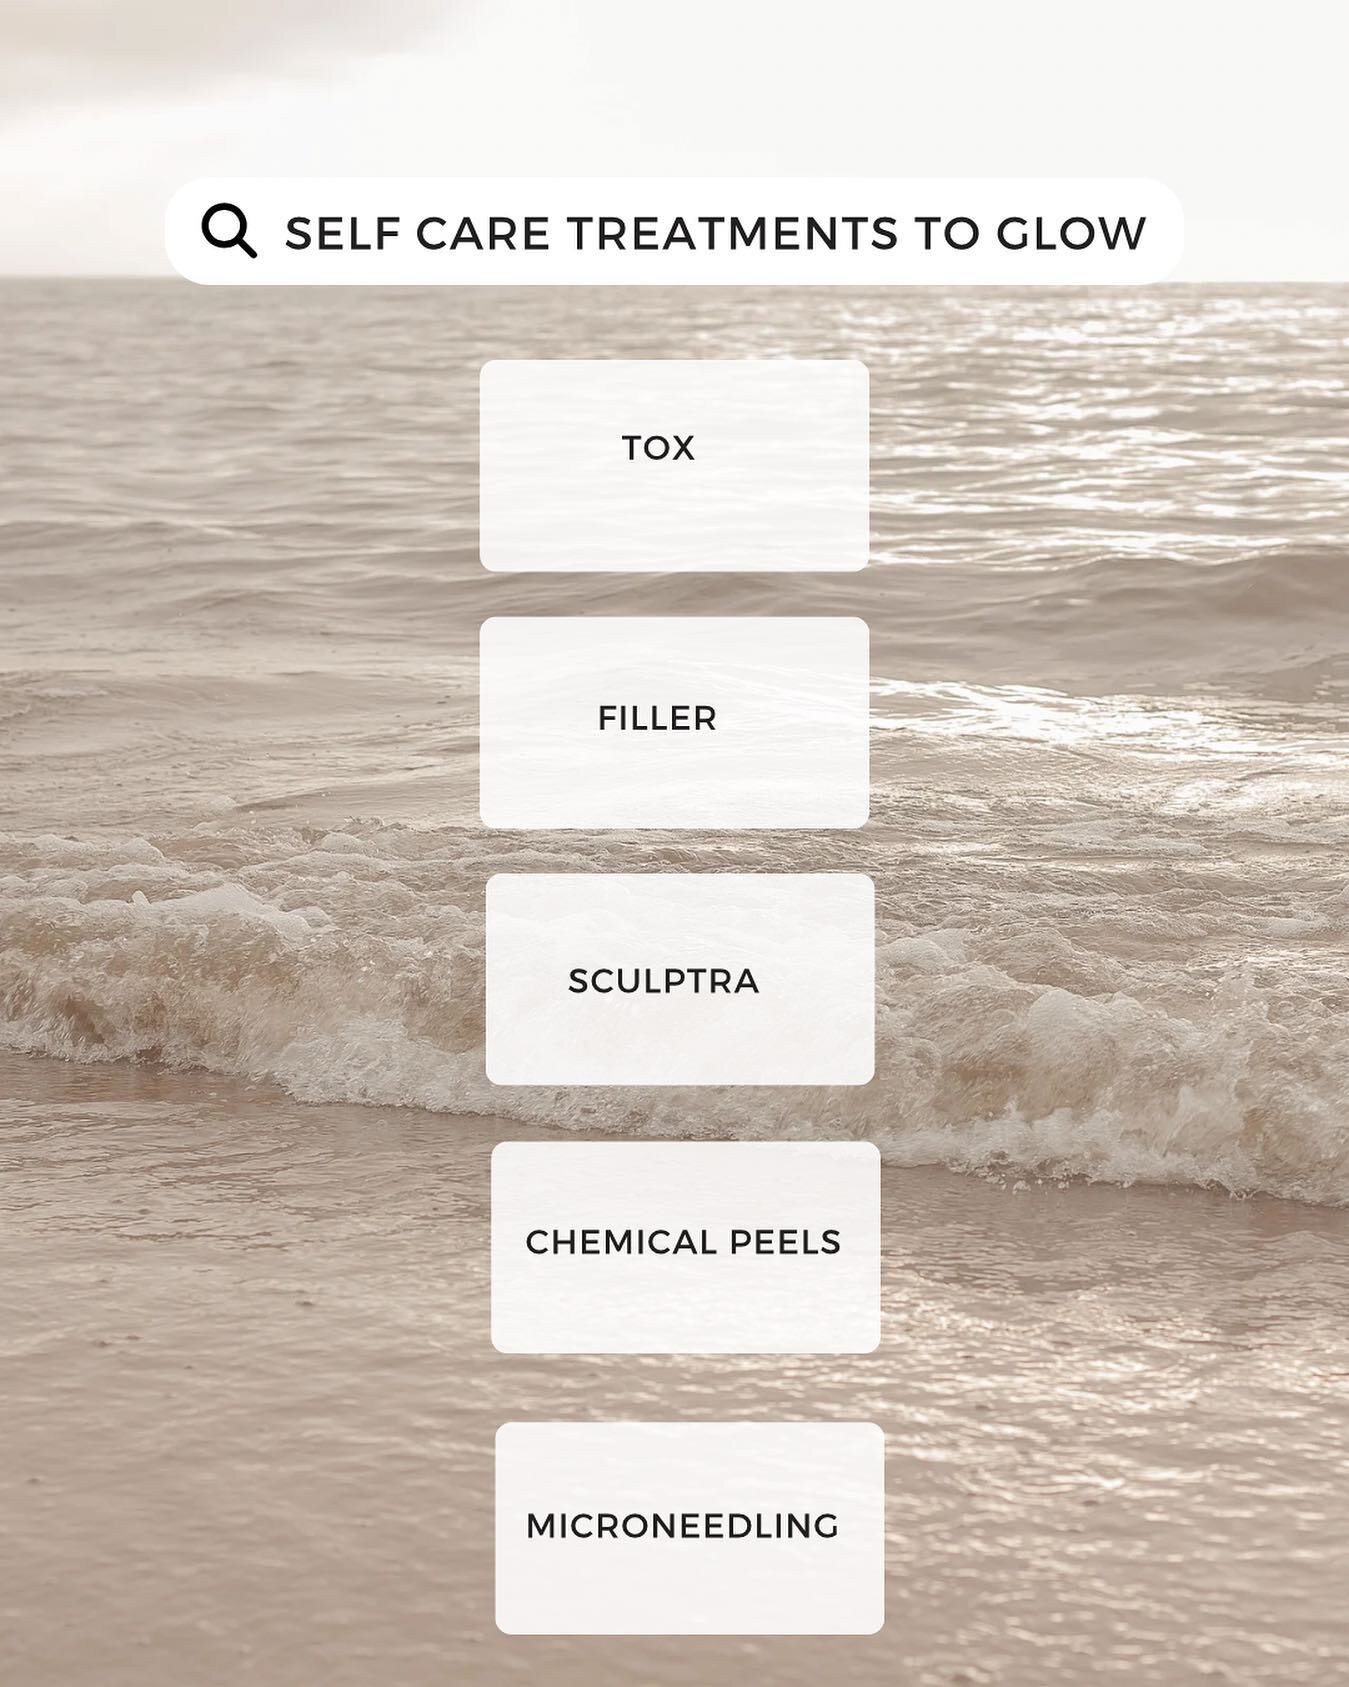 Elevate your self care with a touch of magic! 🪄 Select from our treatment options of revitalizing tox to volumizing fillers, transformative Sculptra and rejuvenating chemical peels &ndash; each step fuels your journey to that luminous radiance. Read